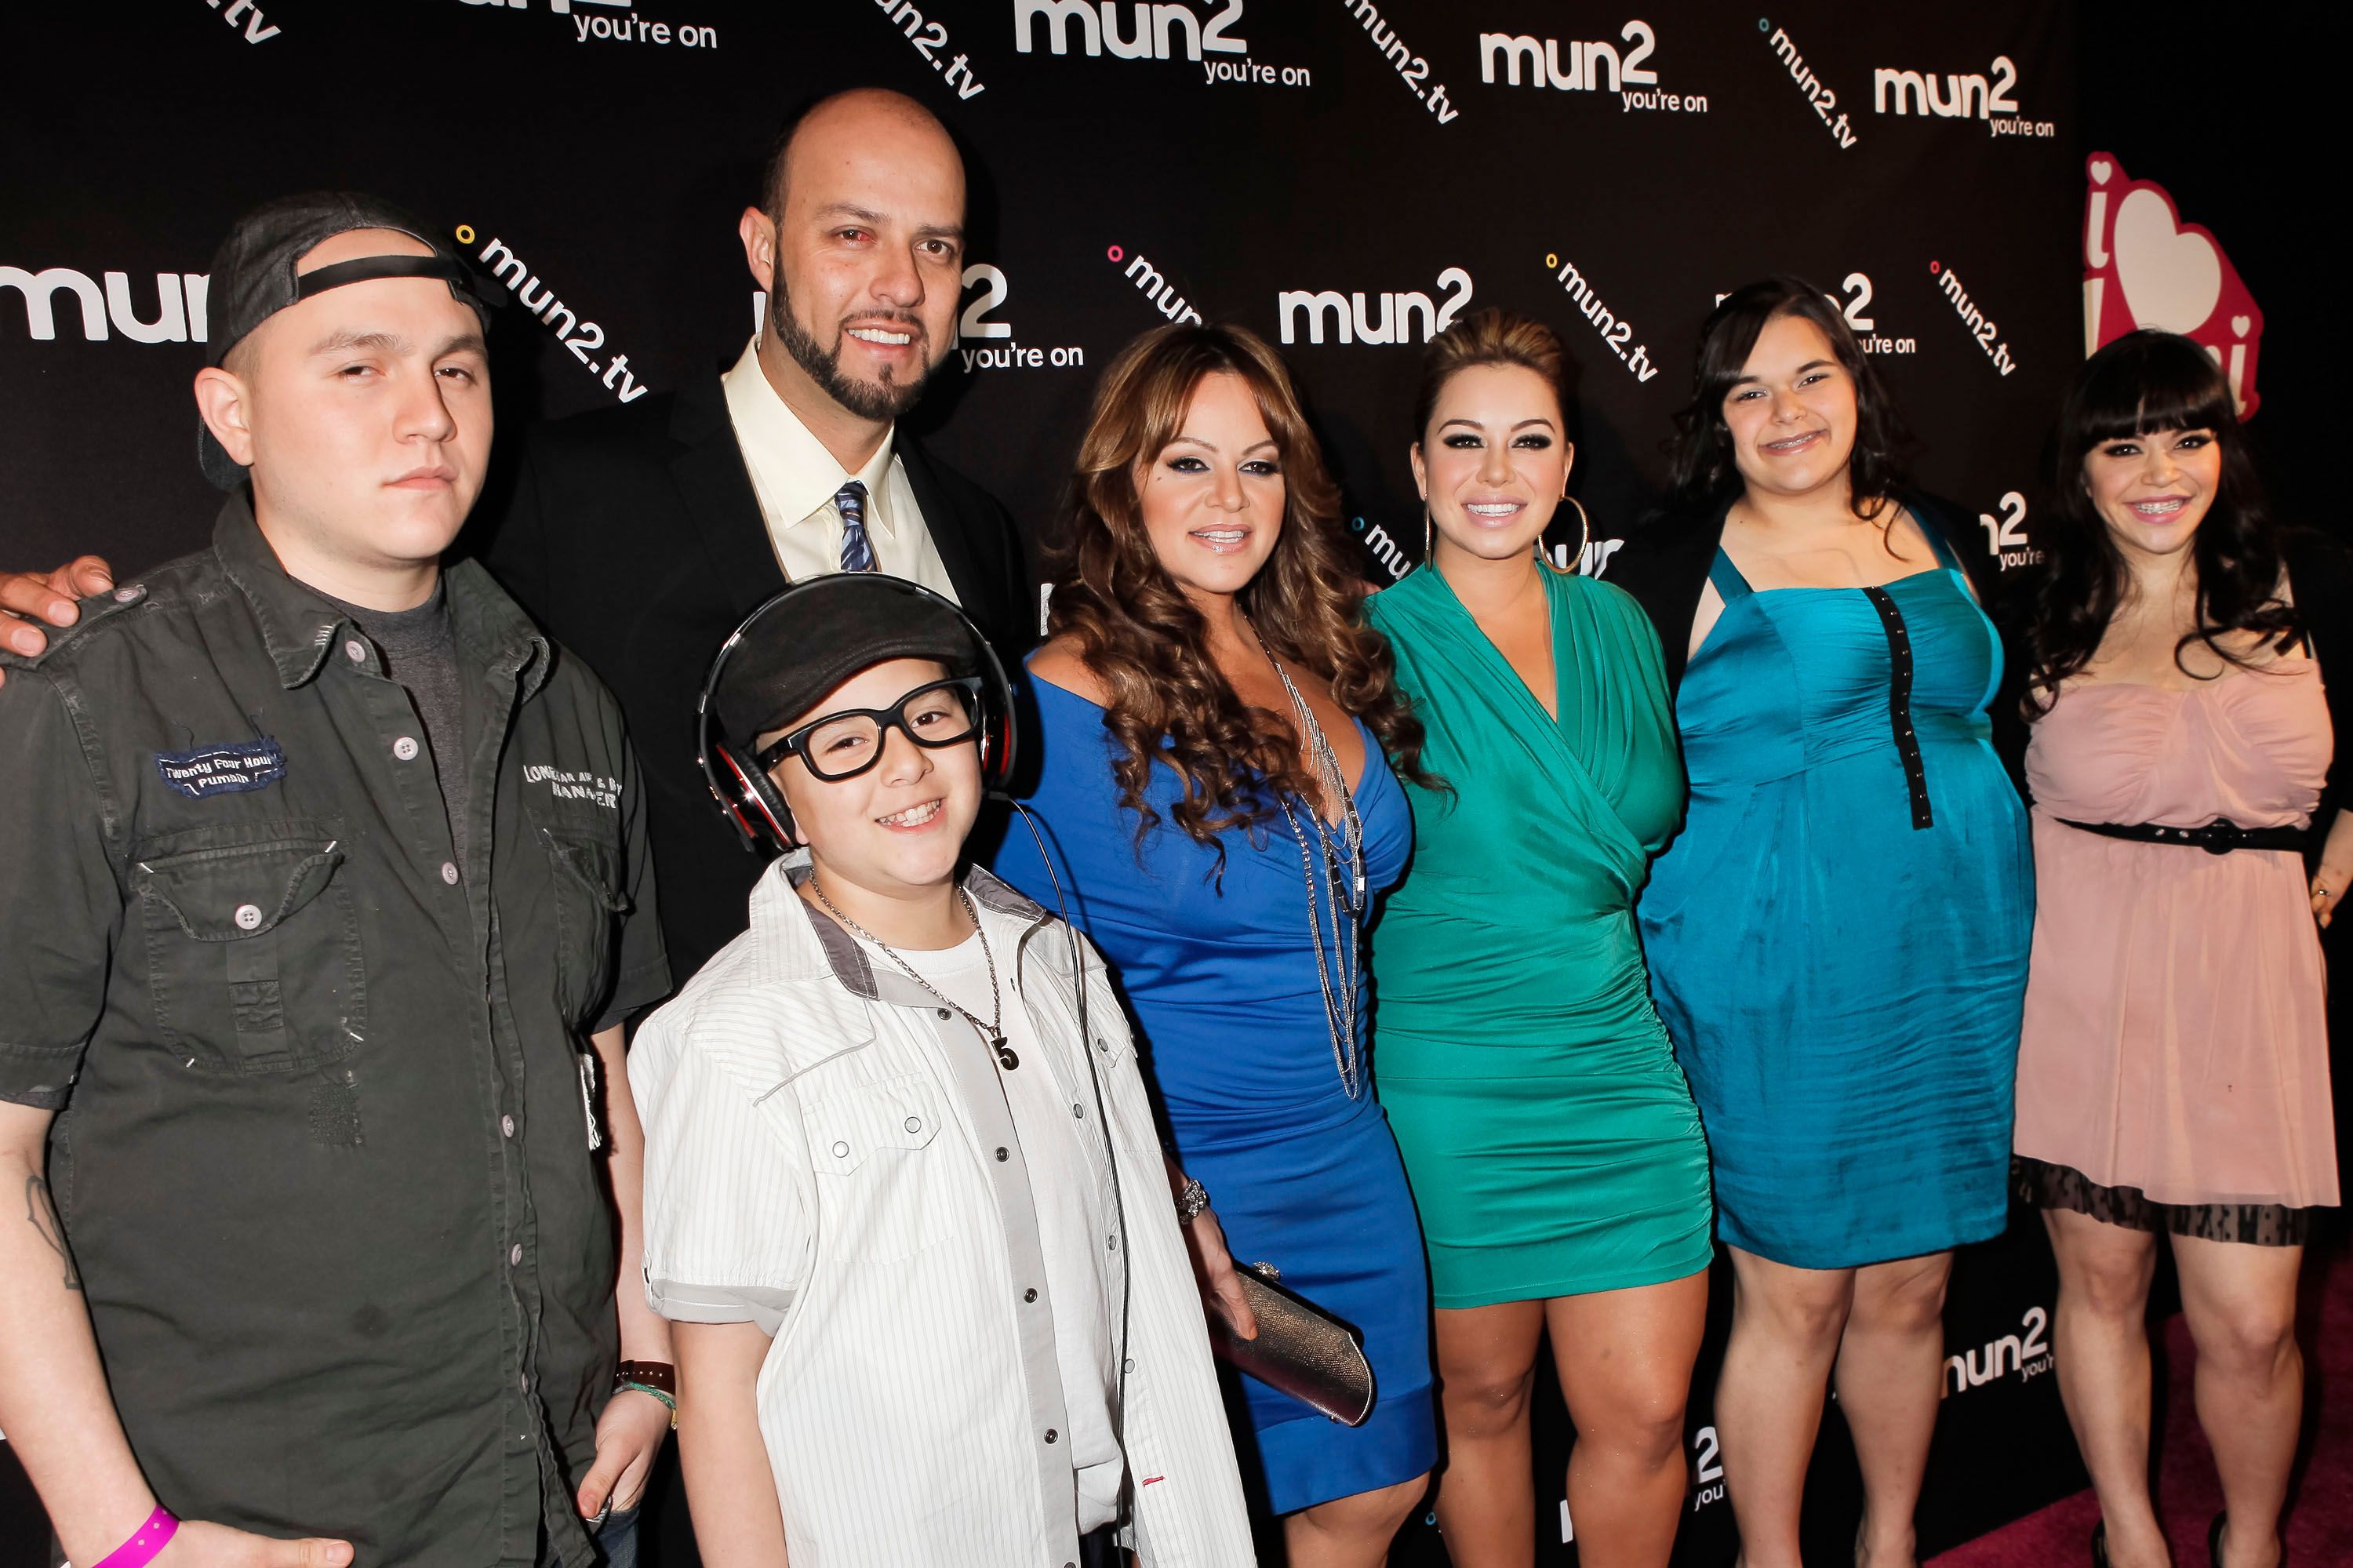 Jenni Rivera and Esteban Loaiza, with her children Johnny Lopez, Janney 'Chiquis' Marin, Jenicka Lopez and Jacqui Marin at the premiere of 'I Love Jenni' Season 2 in 2012. in Hollywood, California. | Source: Getty Images